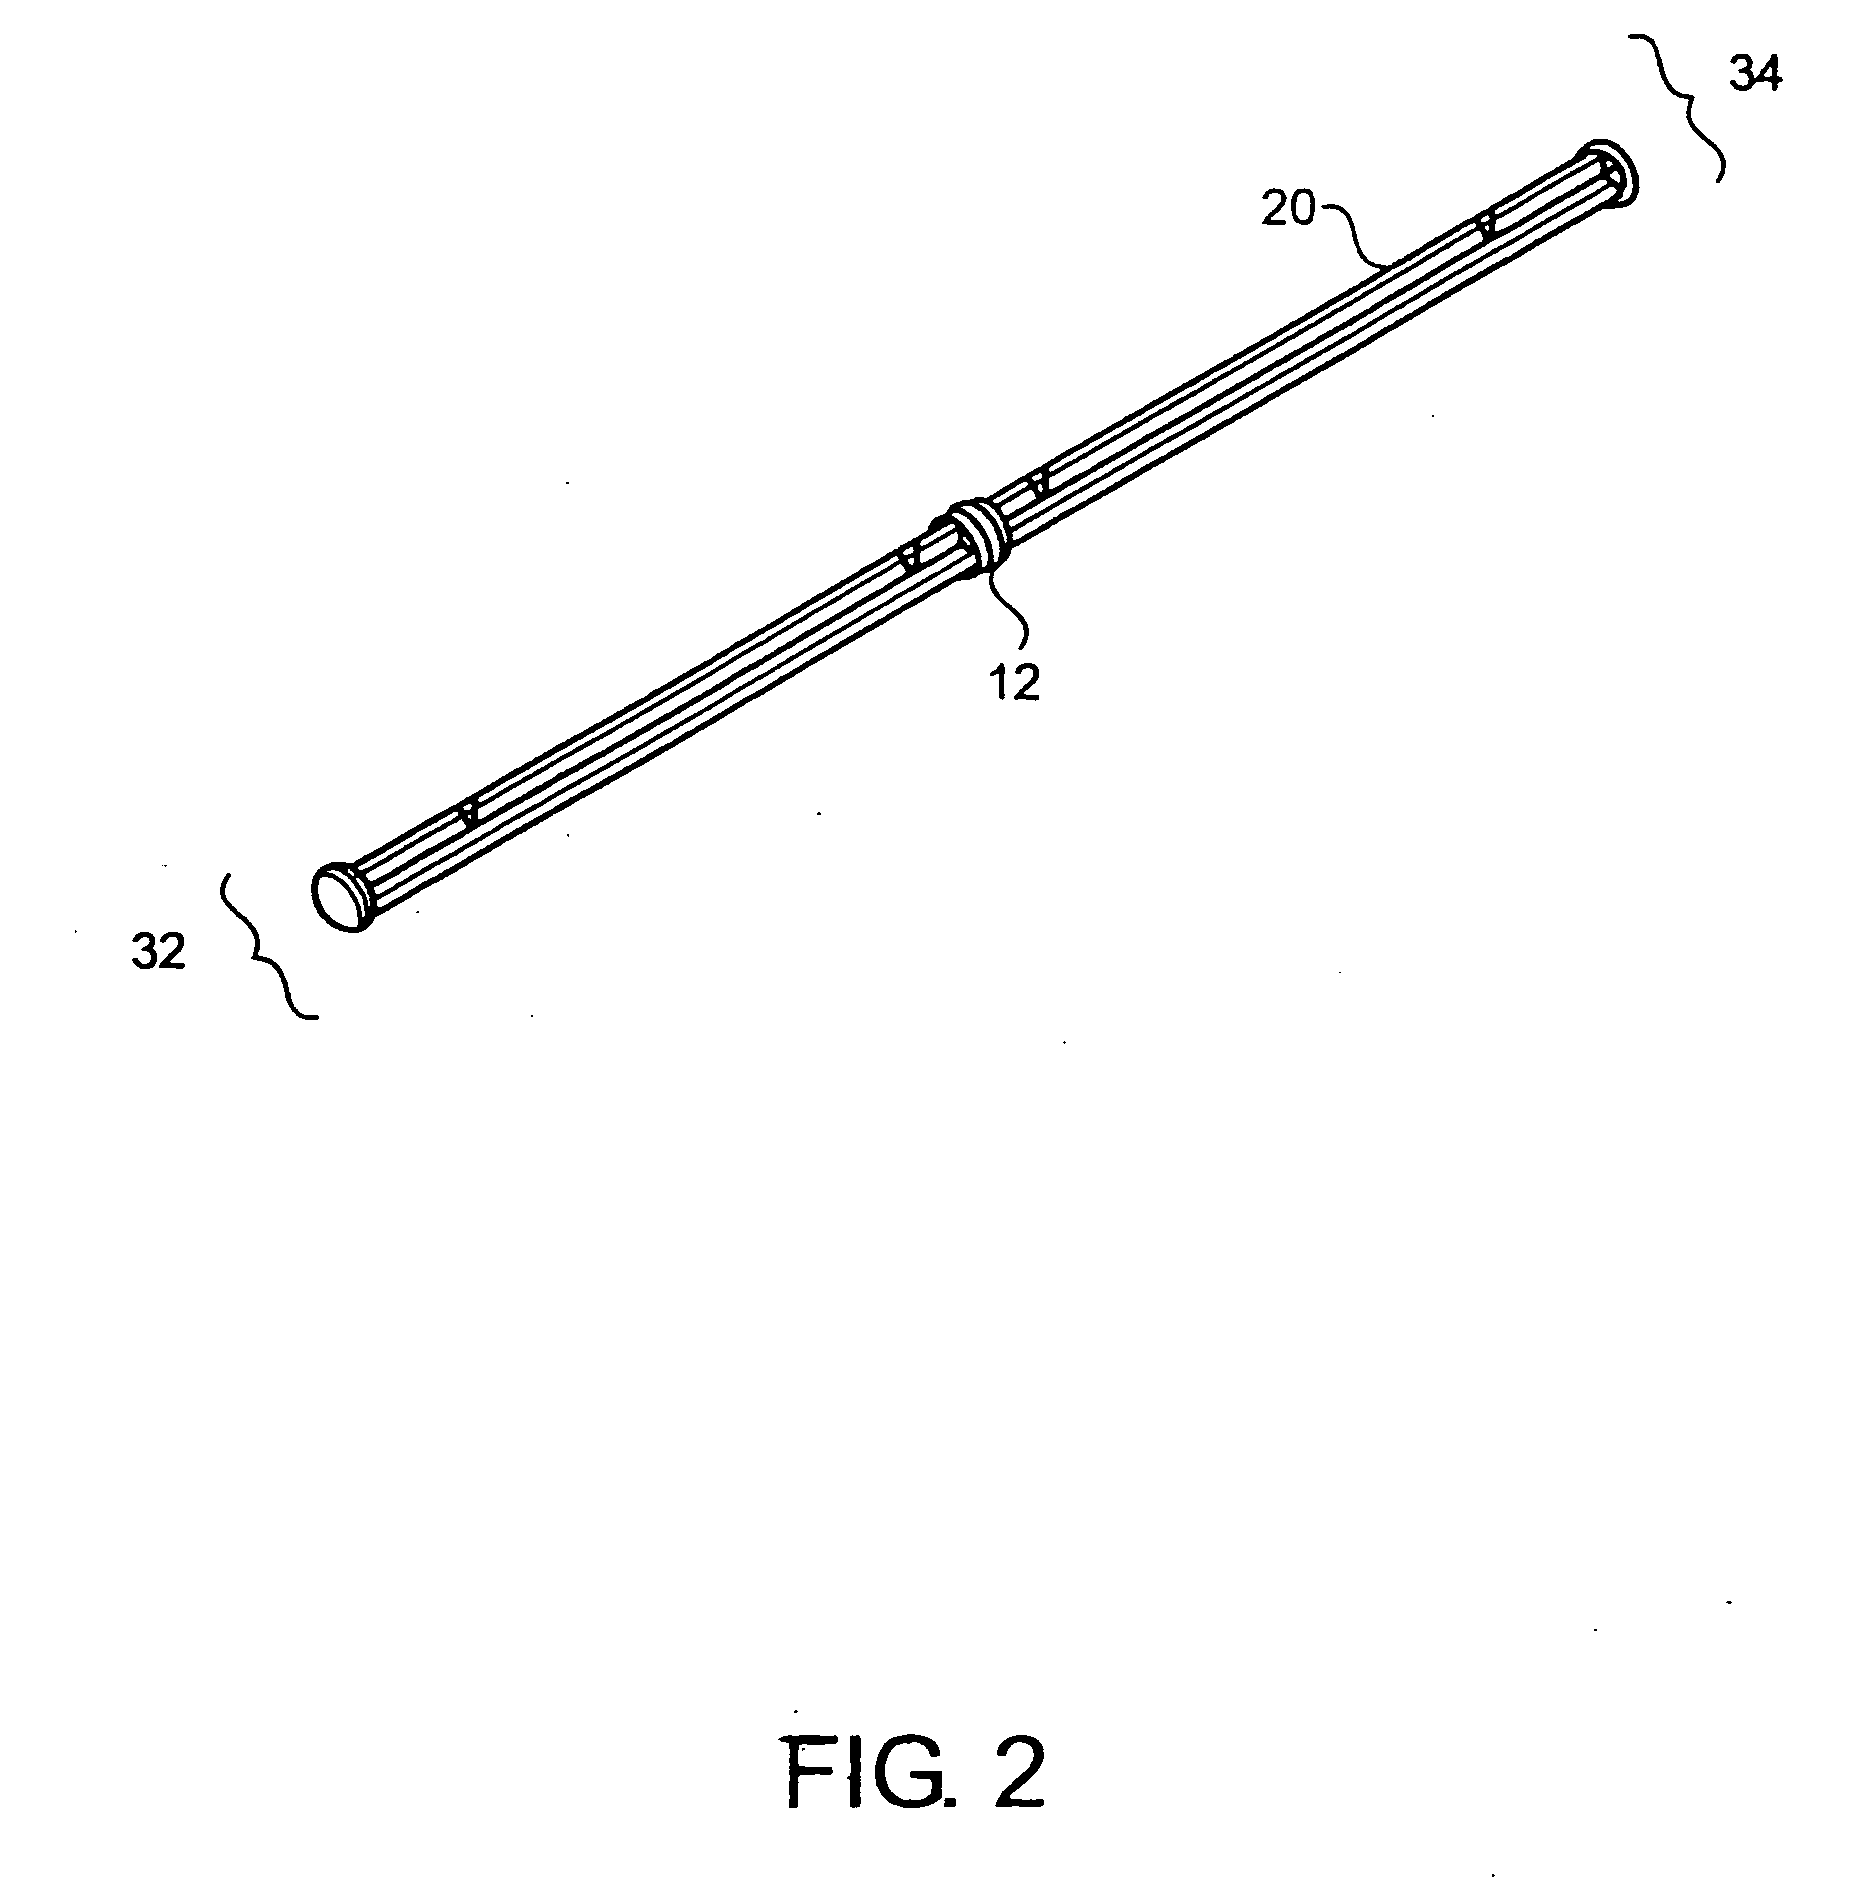 Bone and cartilage implant delivery device